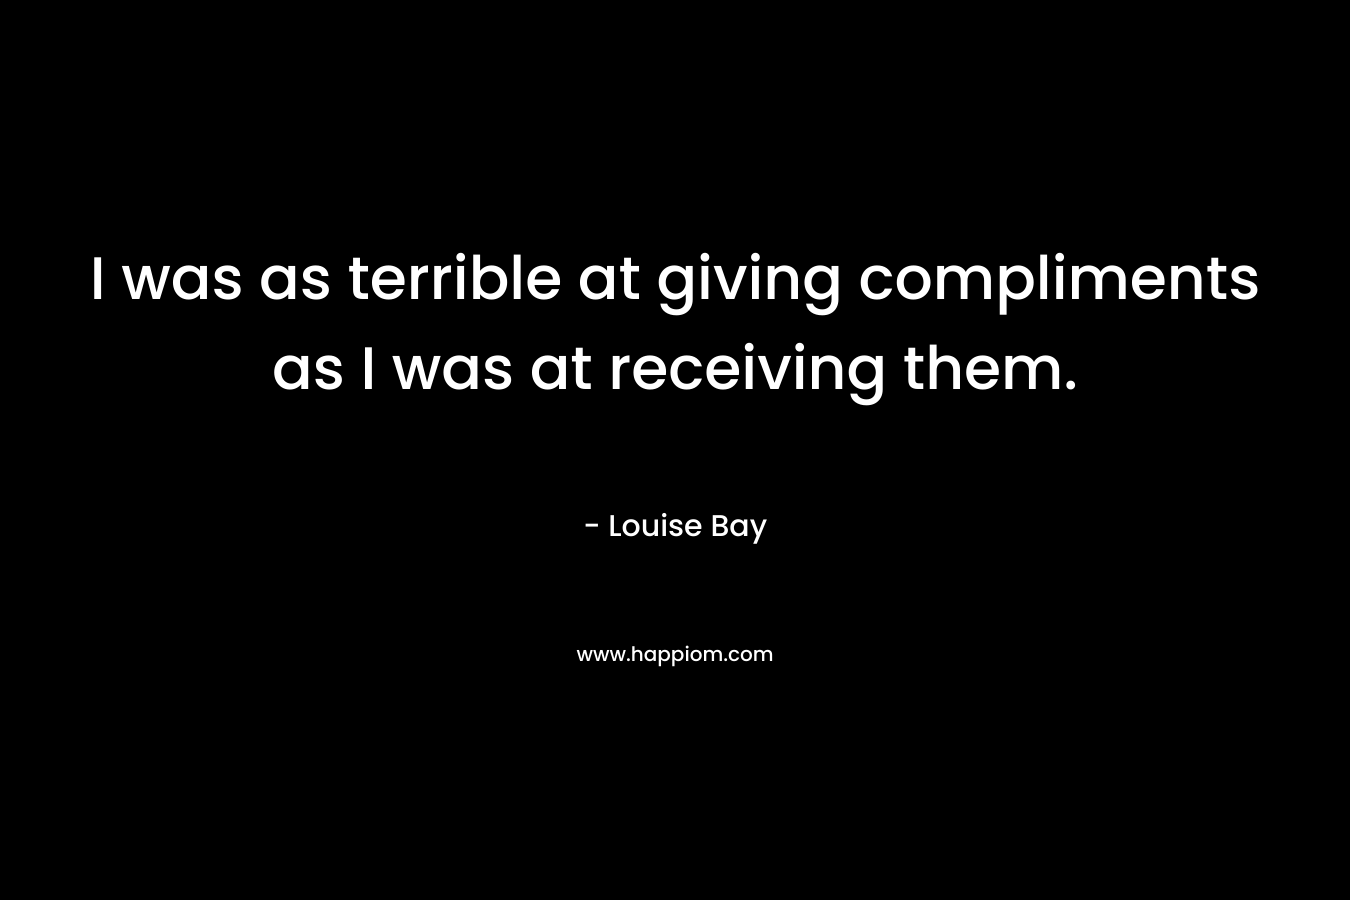 I was as terrible at giving compliments as I was at receiving them. – Louise Bay